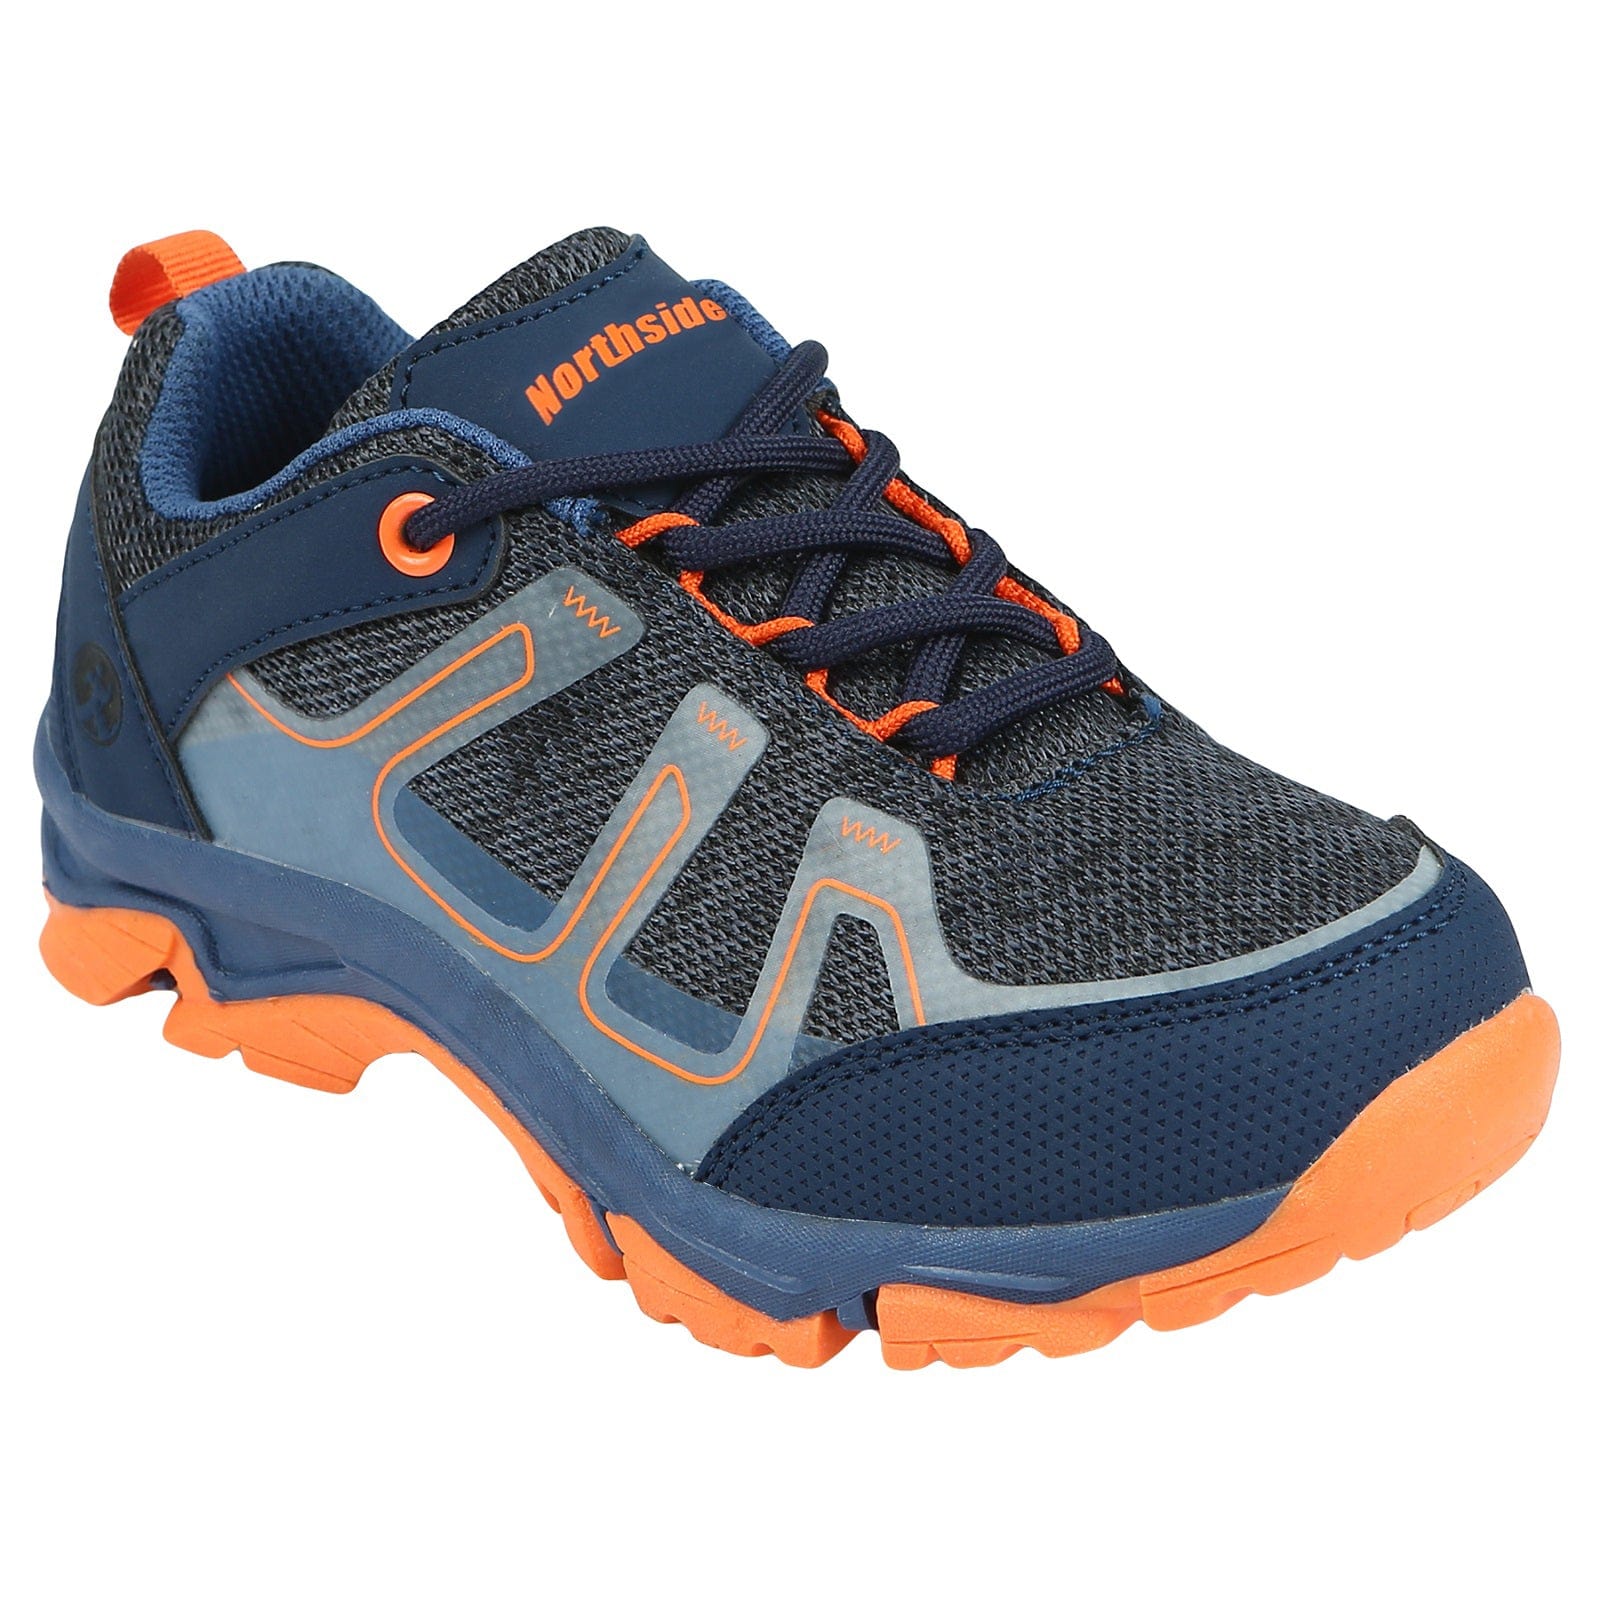 gamma hiking shoes for kids